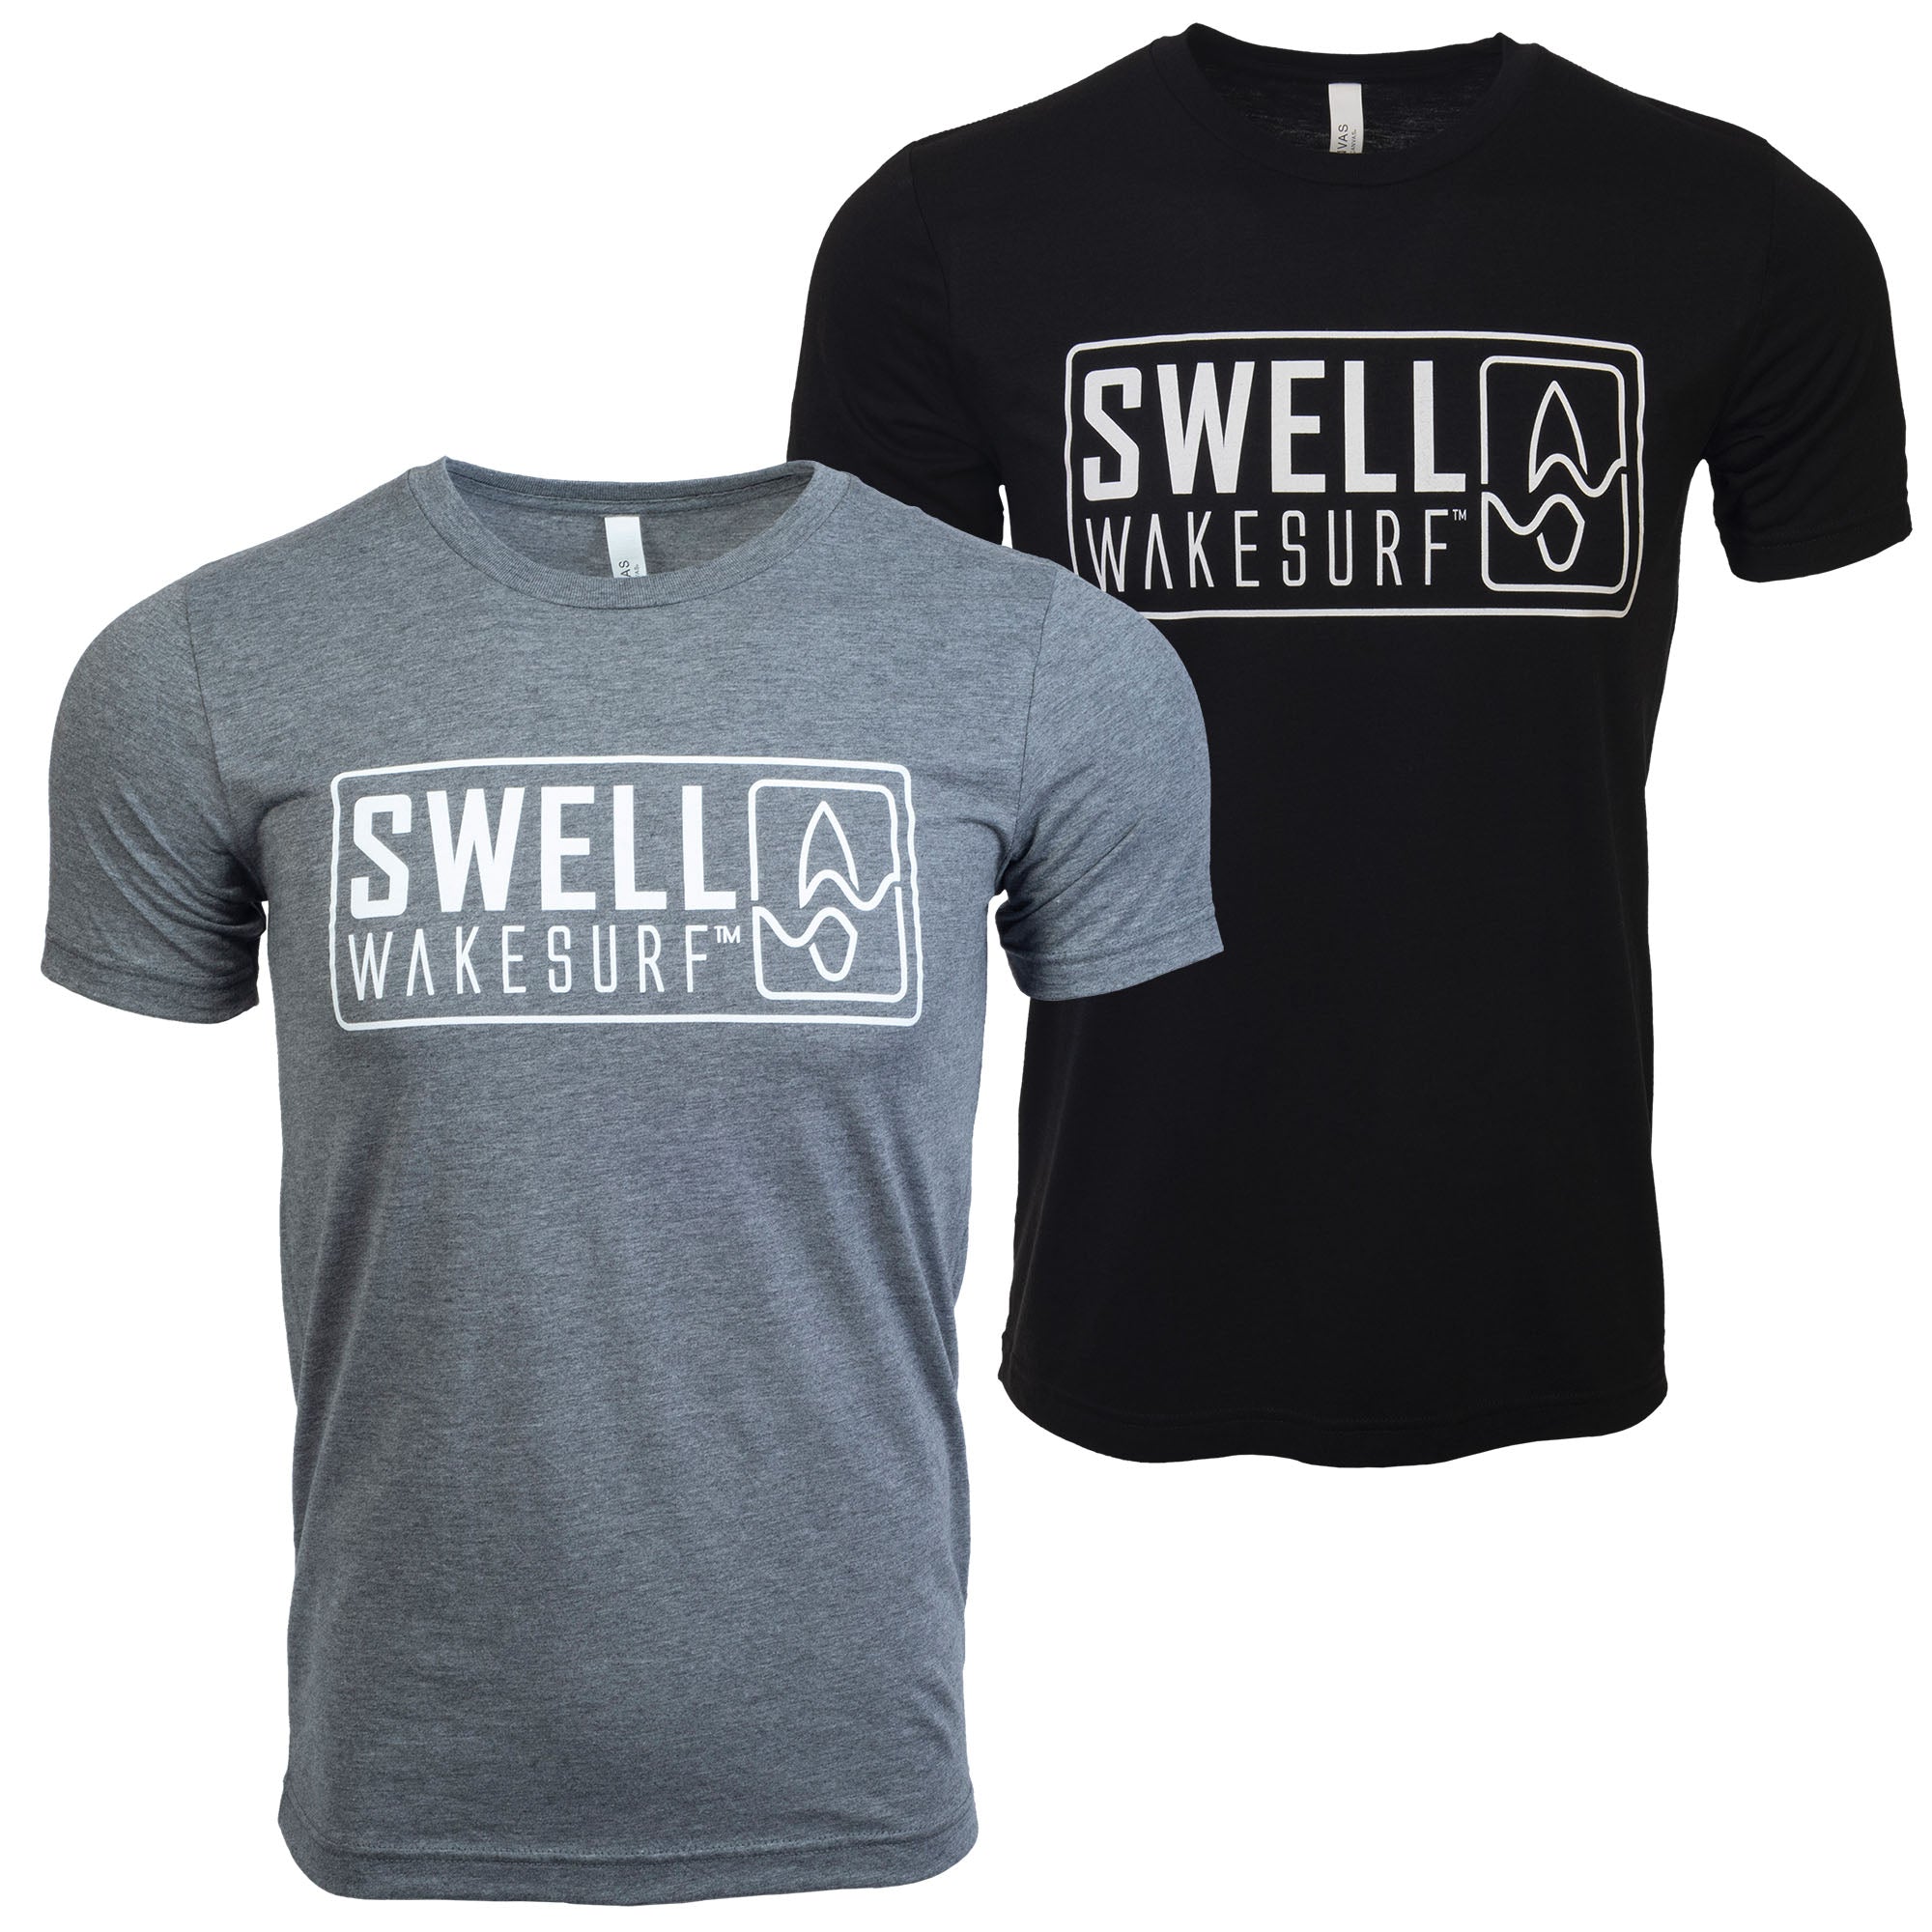 Two SWELL Wakesurf Badge shirts featuring a screenprint logo that says "swell surfboard.